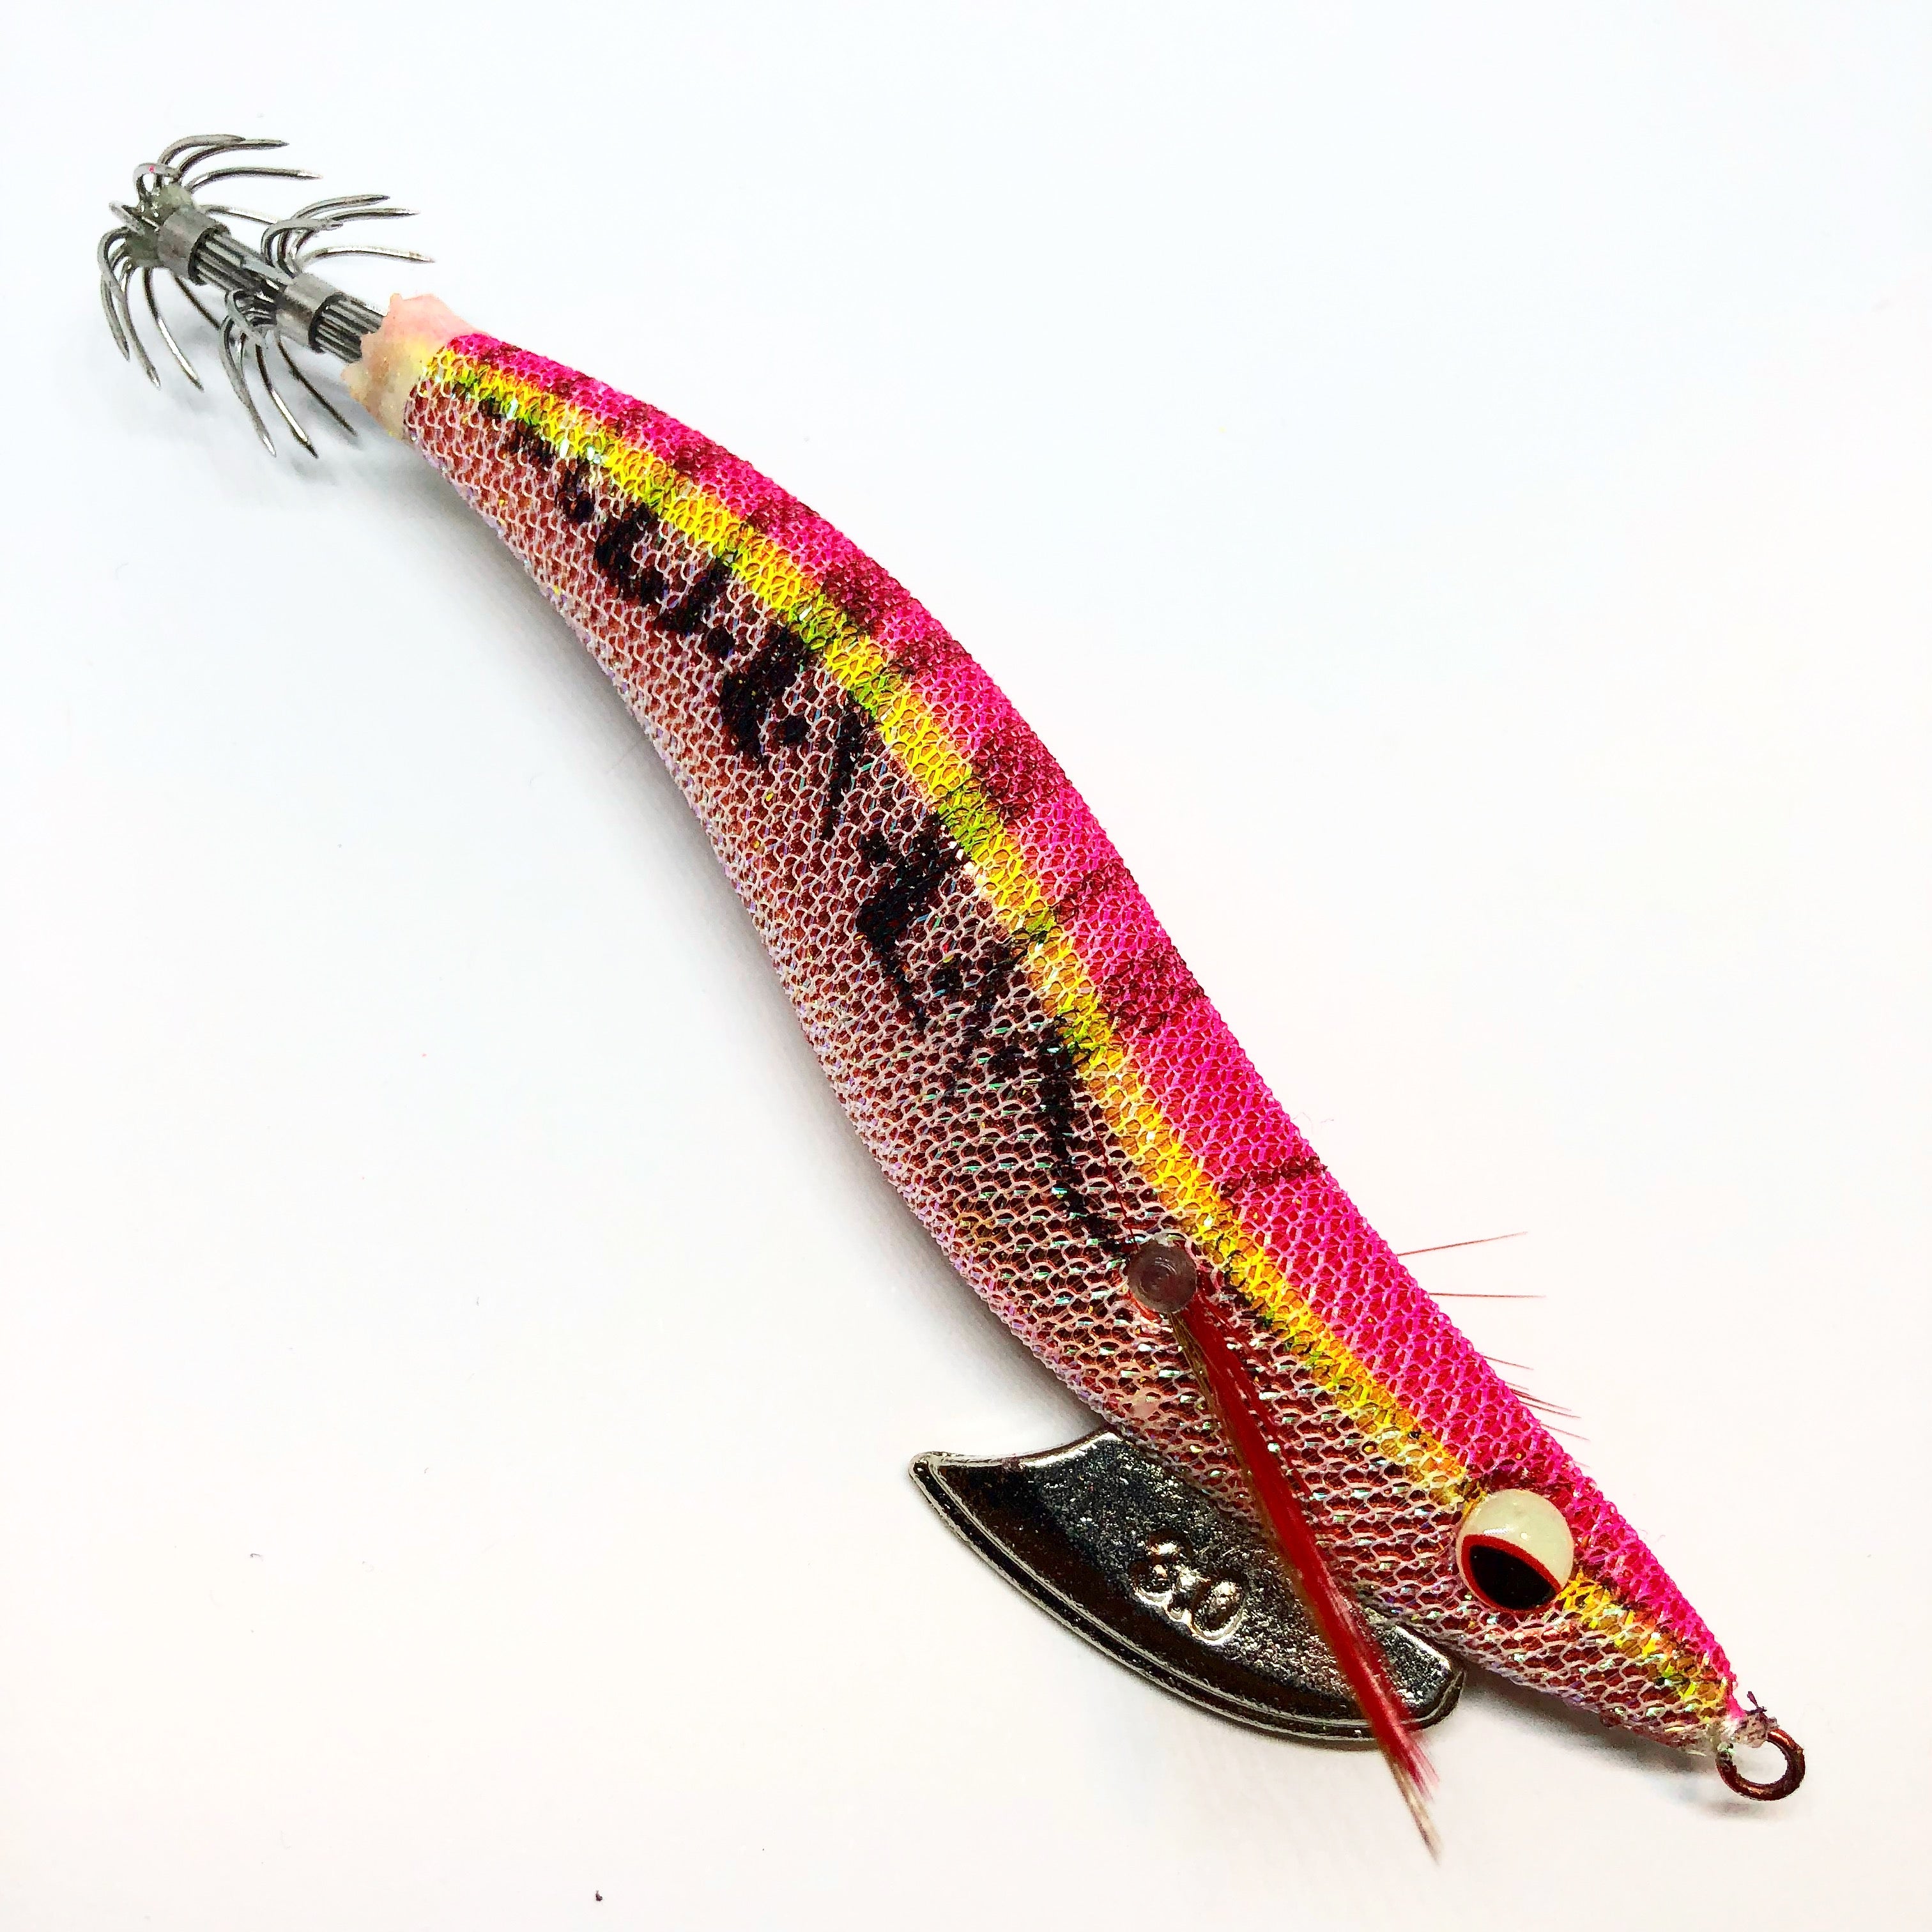 SQUID ABSOLUTELY love the new INKU SQUID JIGS The new range of Inku Sq